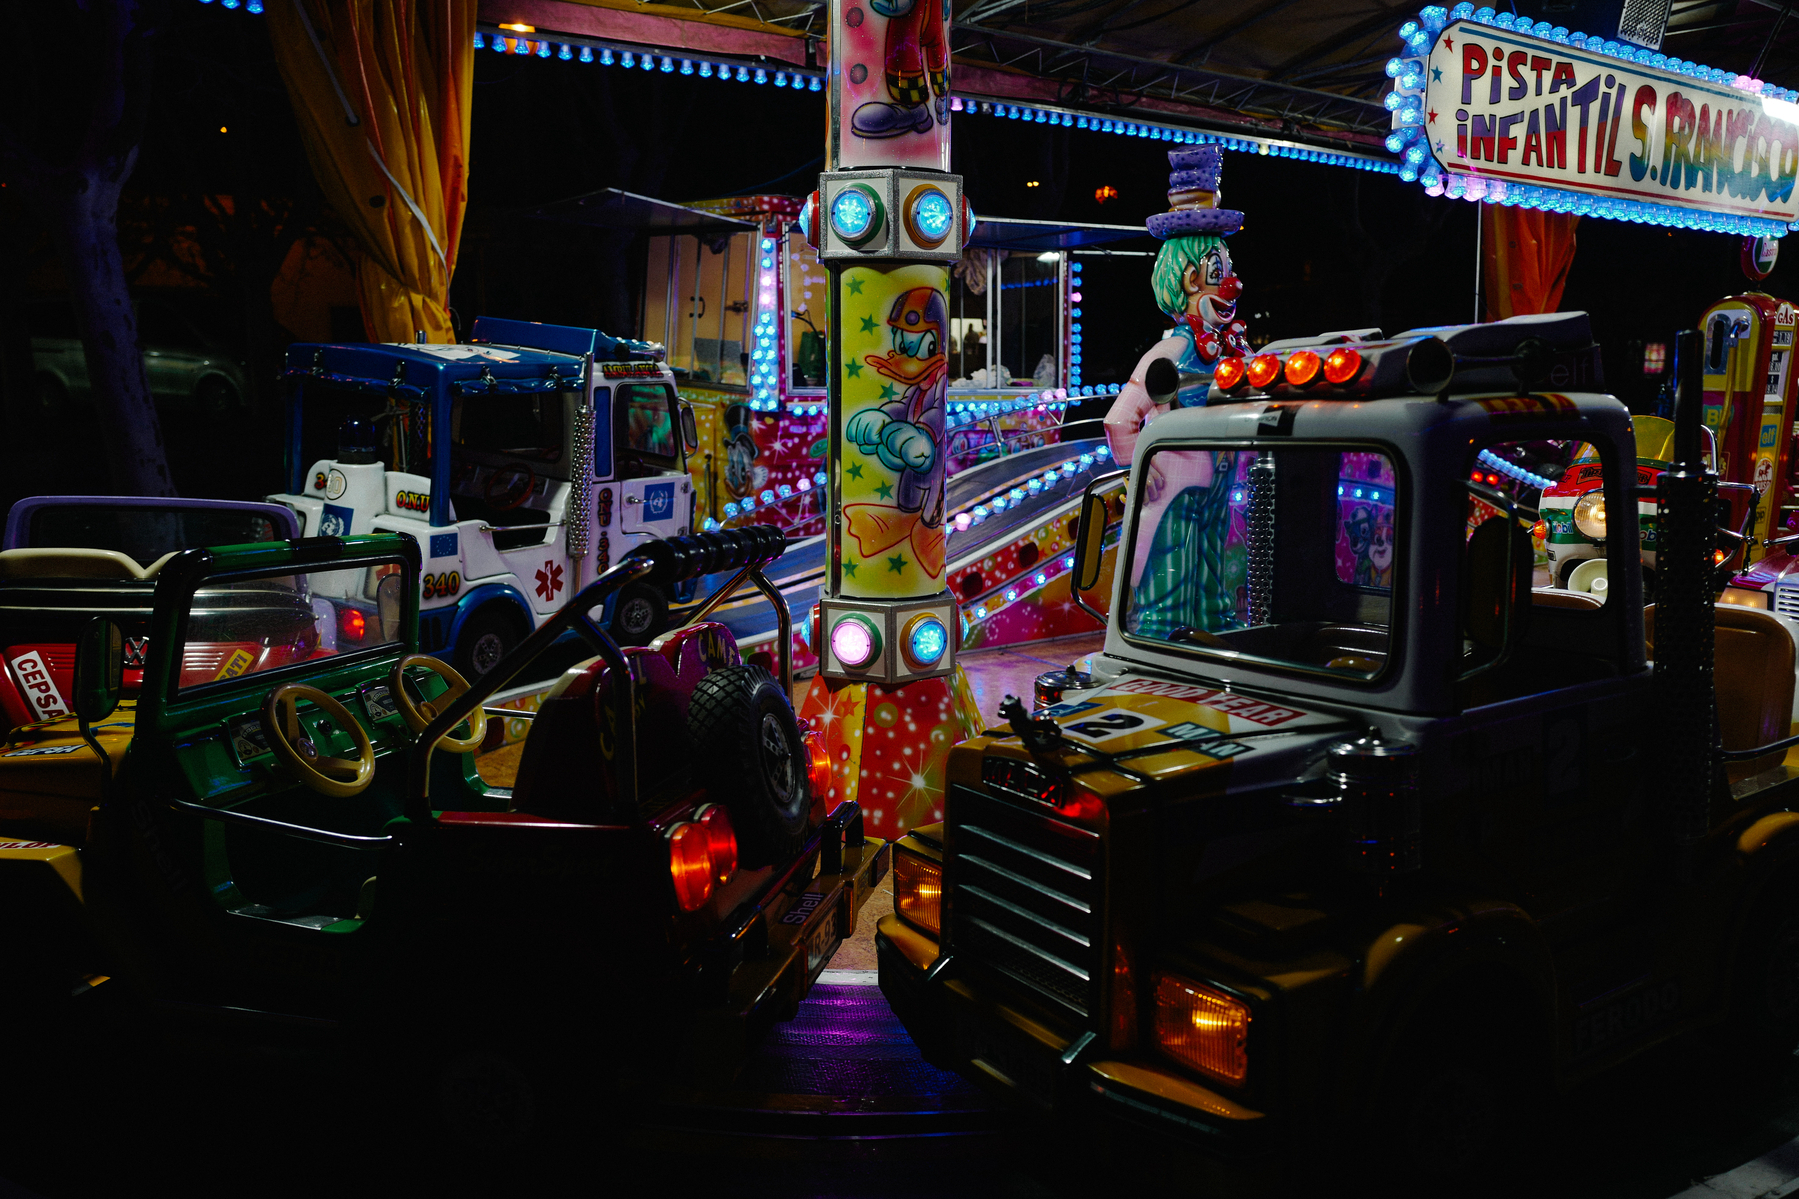 Amusement park ride featuring colorful kiddie trucks adorned with lights on a vibrant track, decorated with circus-themed artwork, at night.